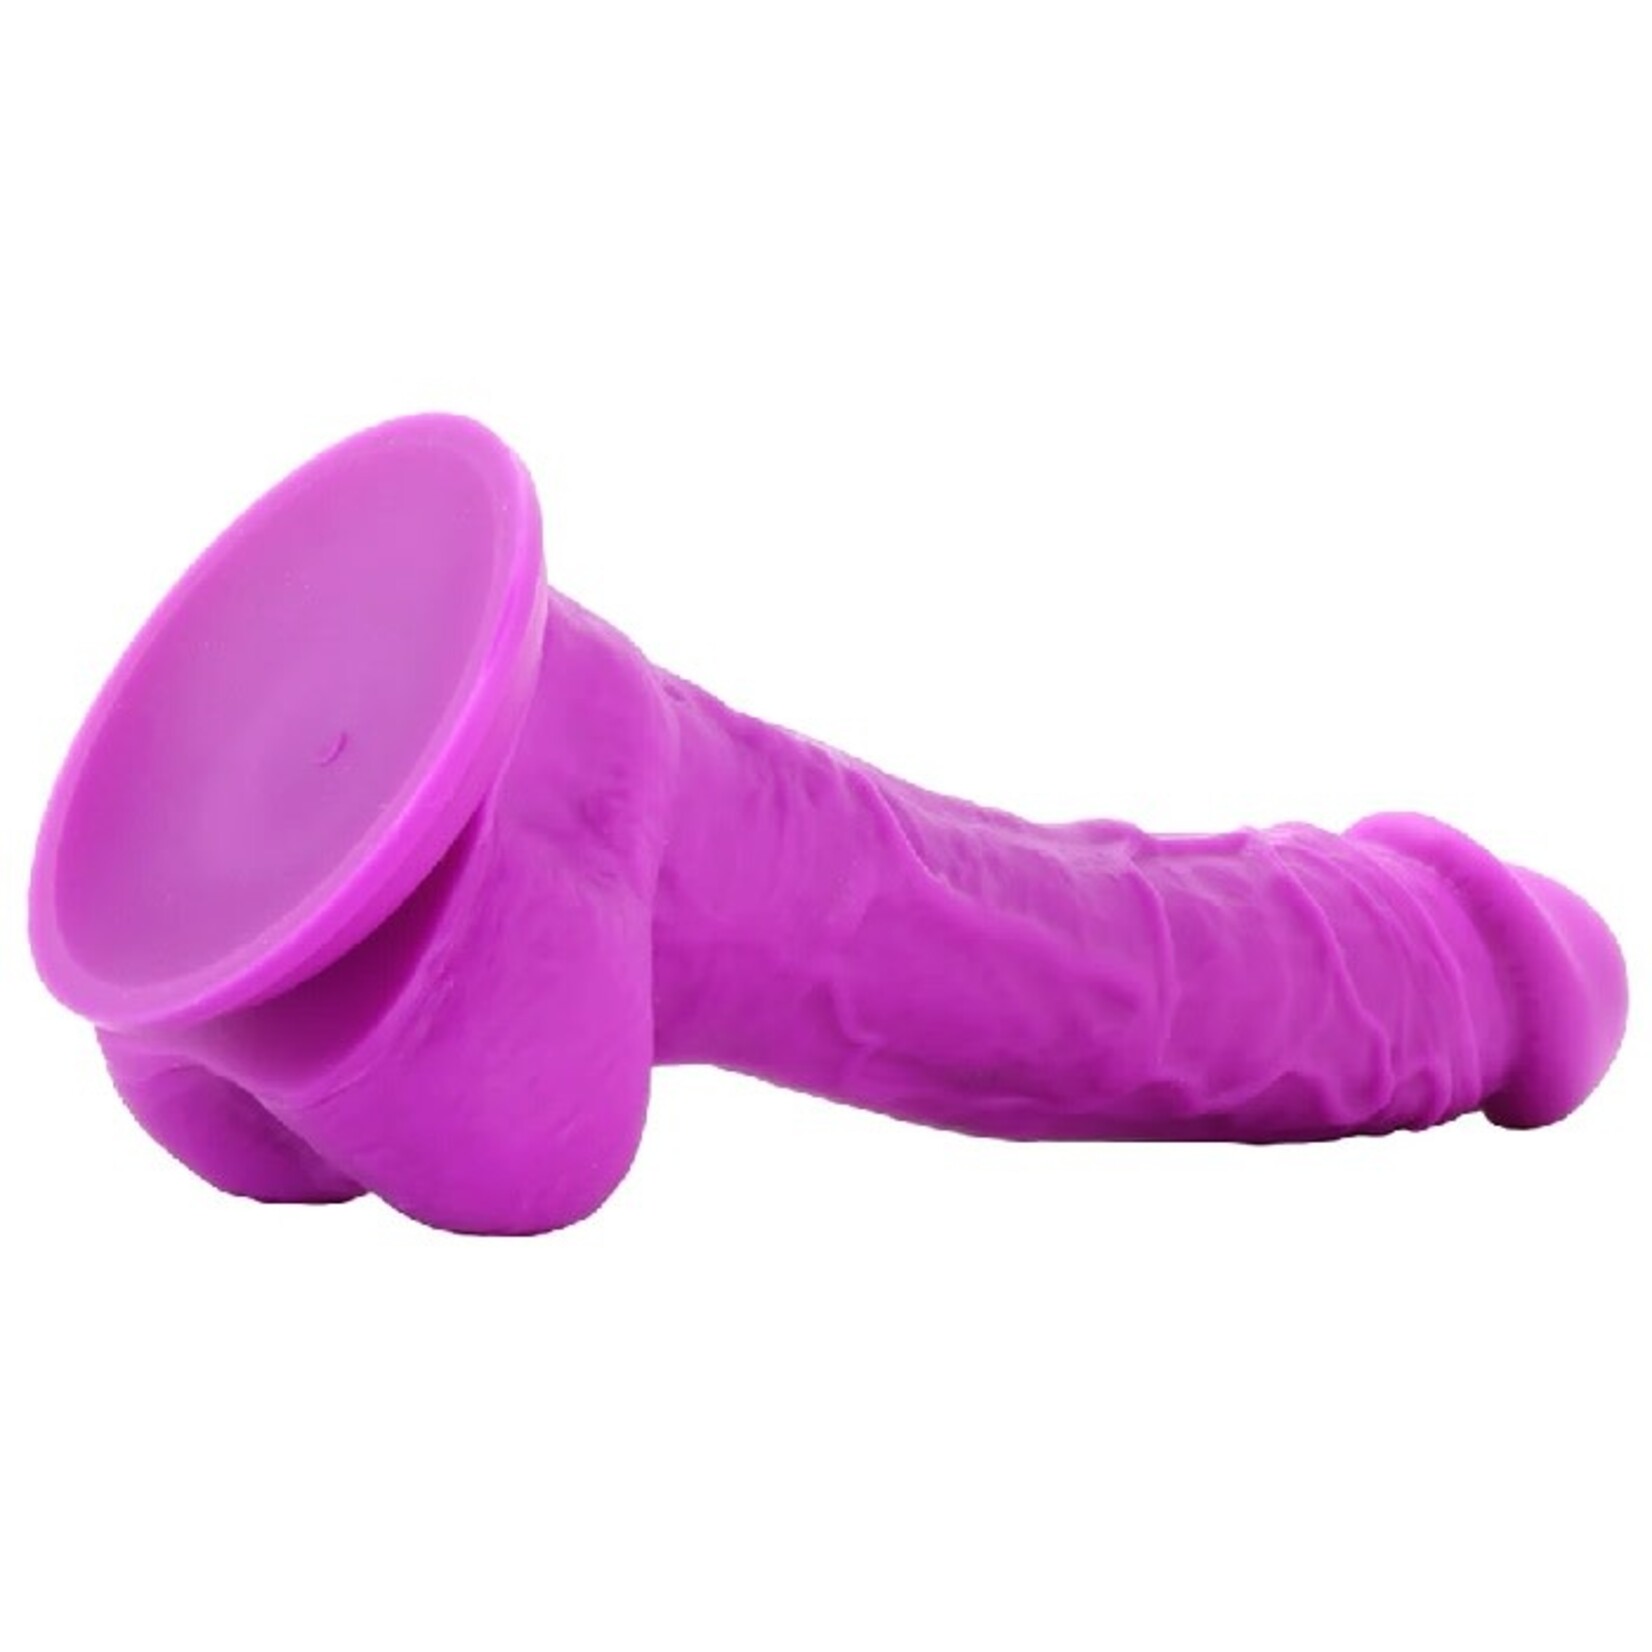 NSNOVELTIES COLOURS 8 INCH DUAL DENSITY SILICONE DILDO IN PURPLE